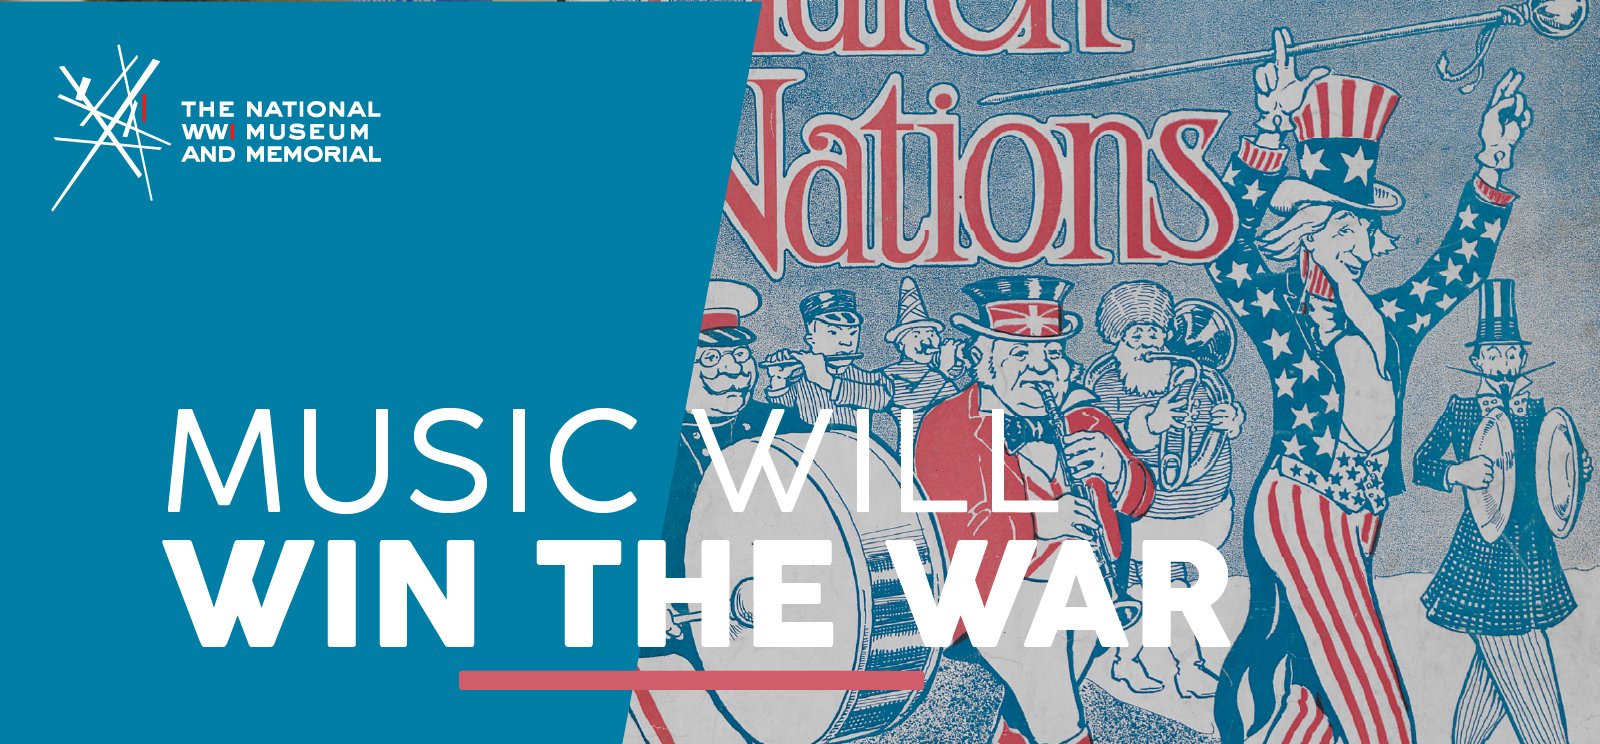 Image: Cartoon drawing in red, white and blue colors of Uncle Sam leading a marching band along. Text: 'Music Will Win The War'